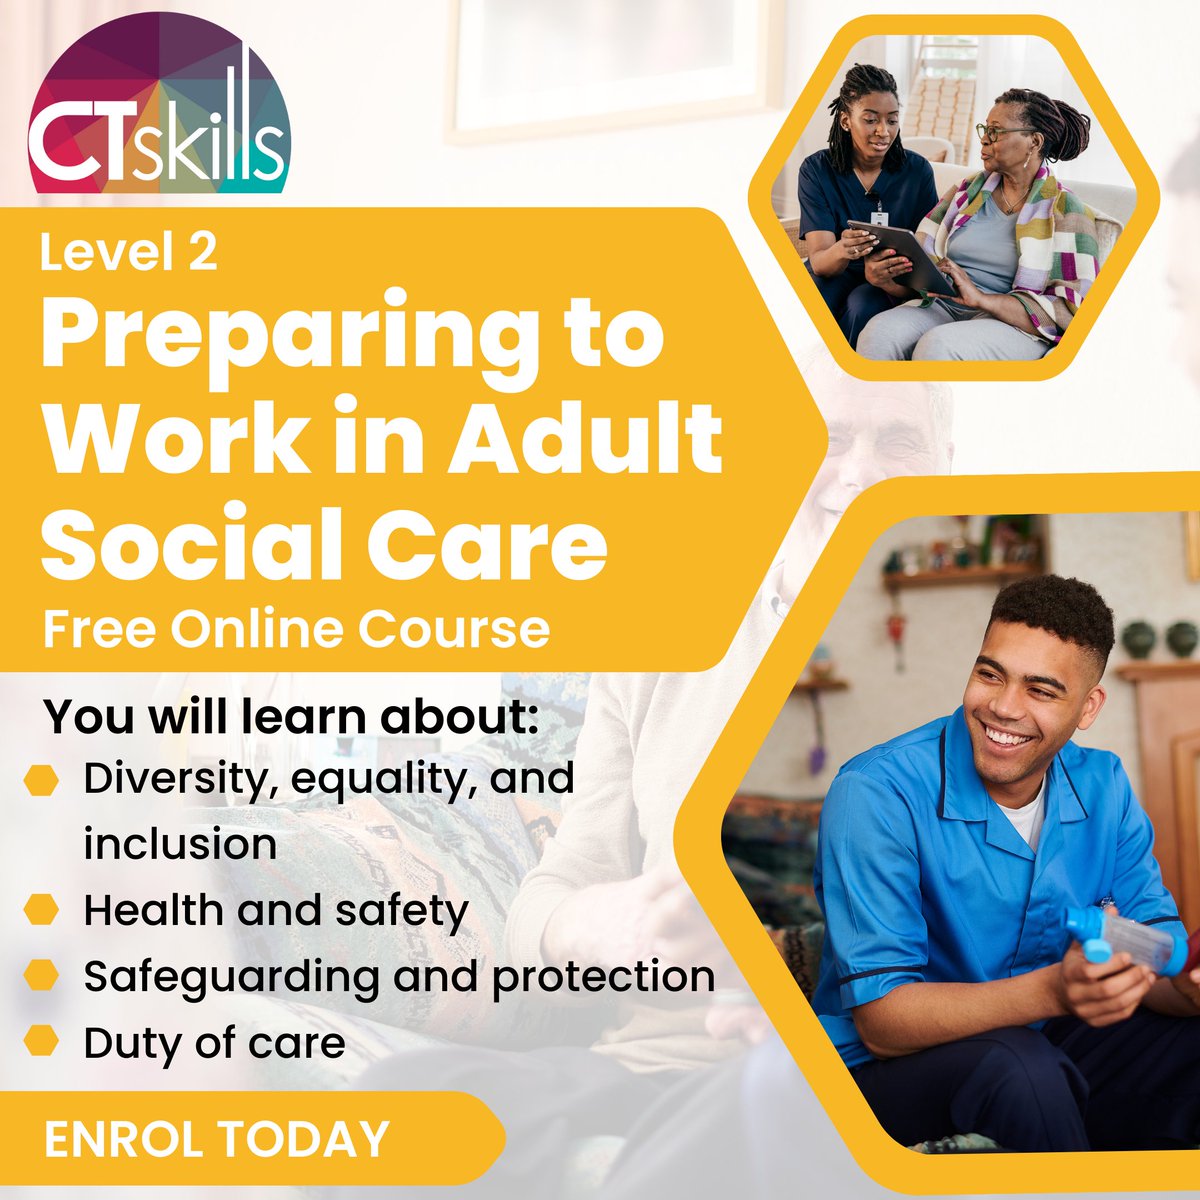 Our Preparing to Work in Adult Social Care free online course will support those who are new to the sector or anyone who would like to work within adult health and social care.

To discover more, visit: ctskills.co.uk/preparing-to-w…

#SocialCare #HealthAndSafety #DutyOfCare